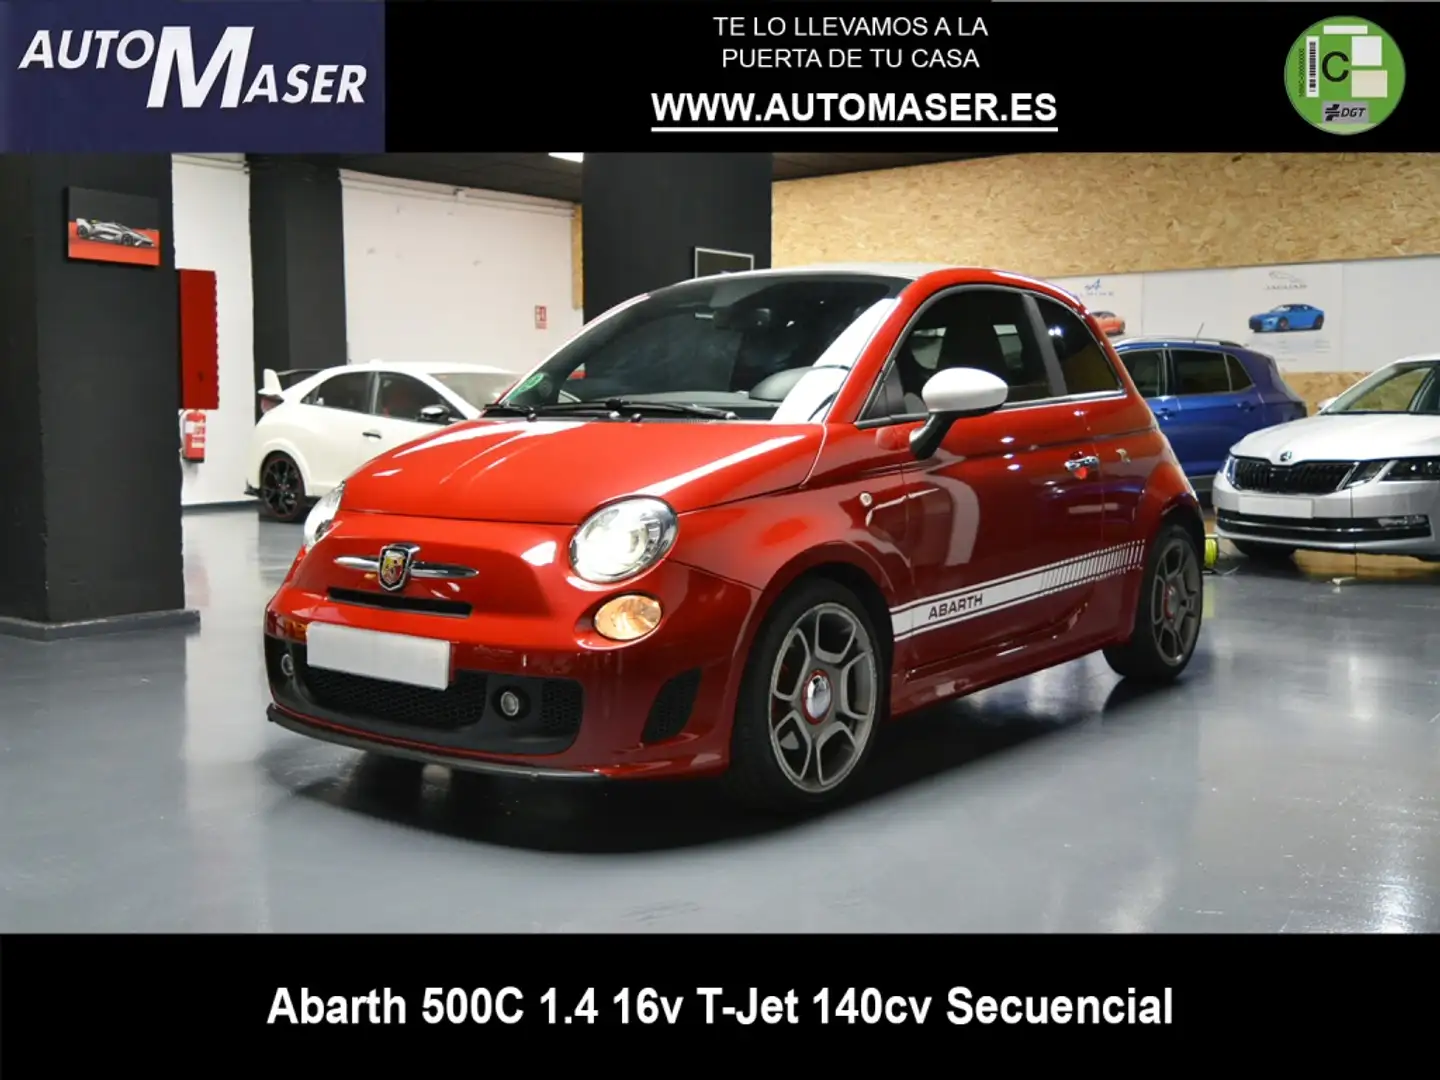 Abarth 500 500C 1.4T JET SECUENCIAL 140 Red - 1